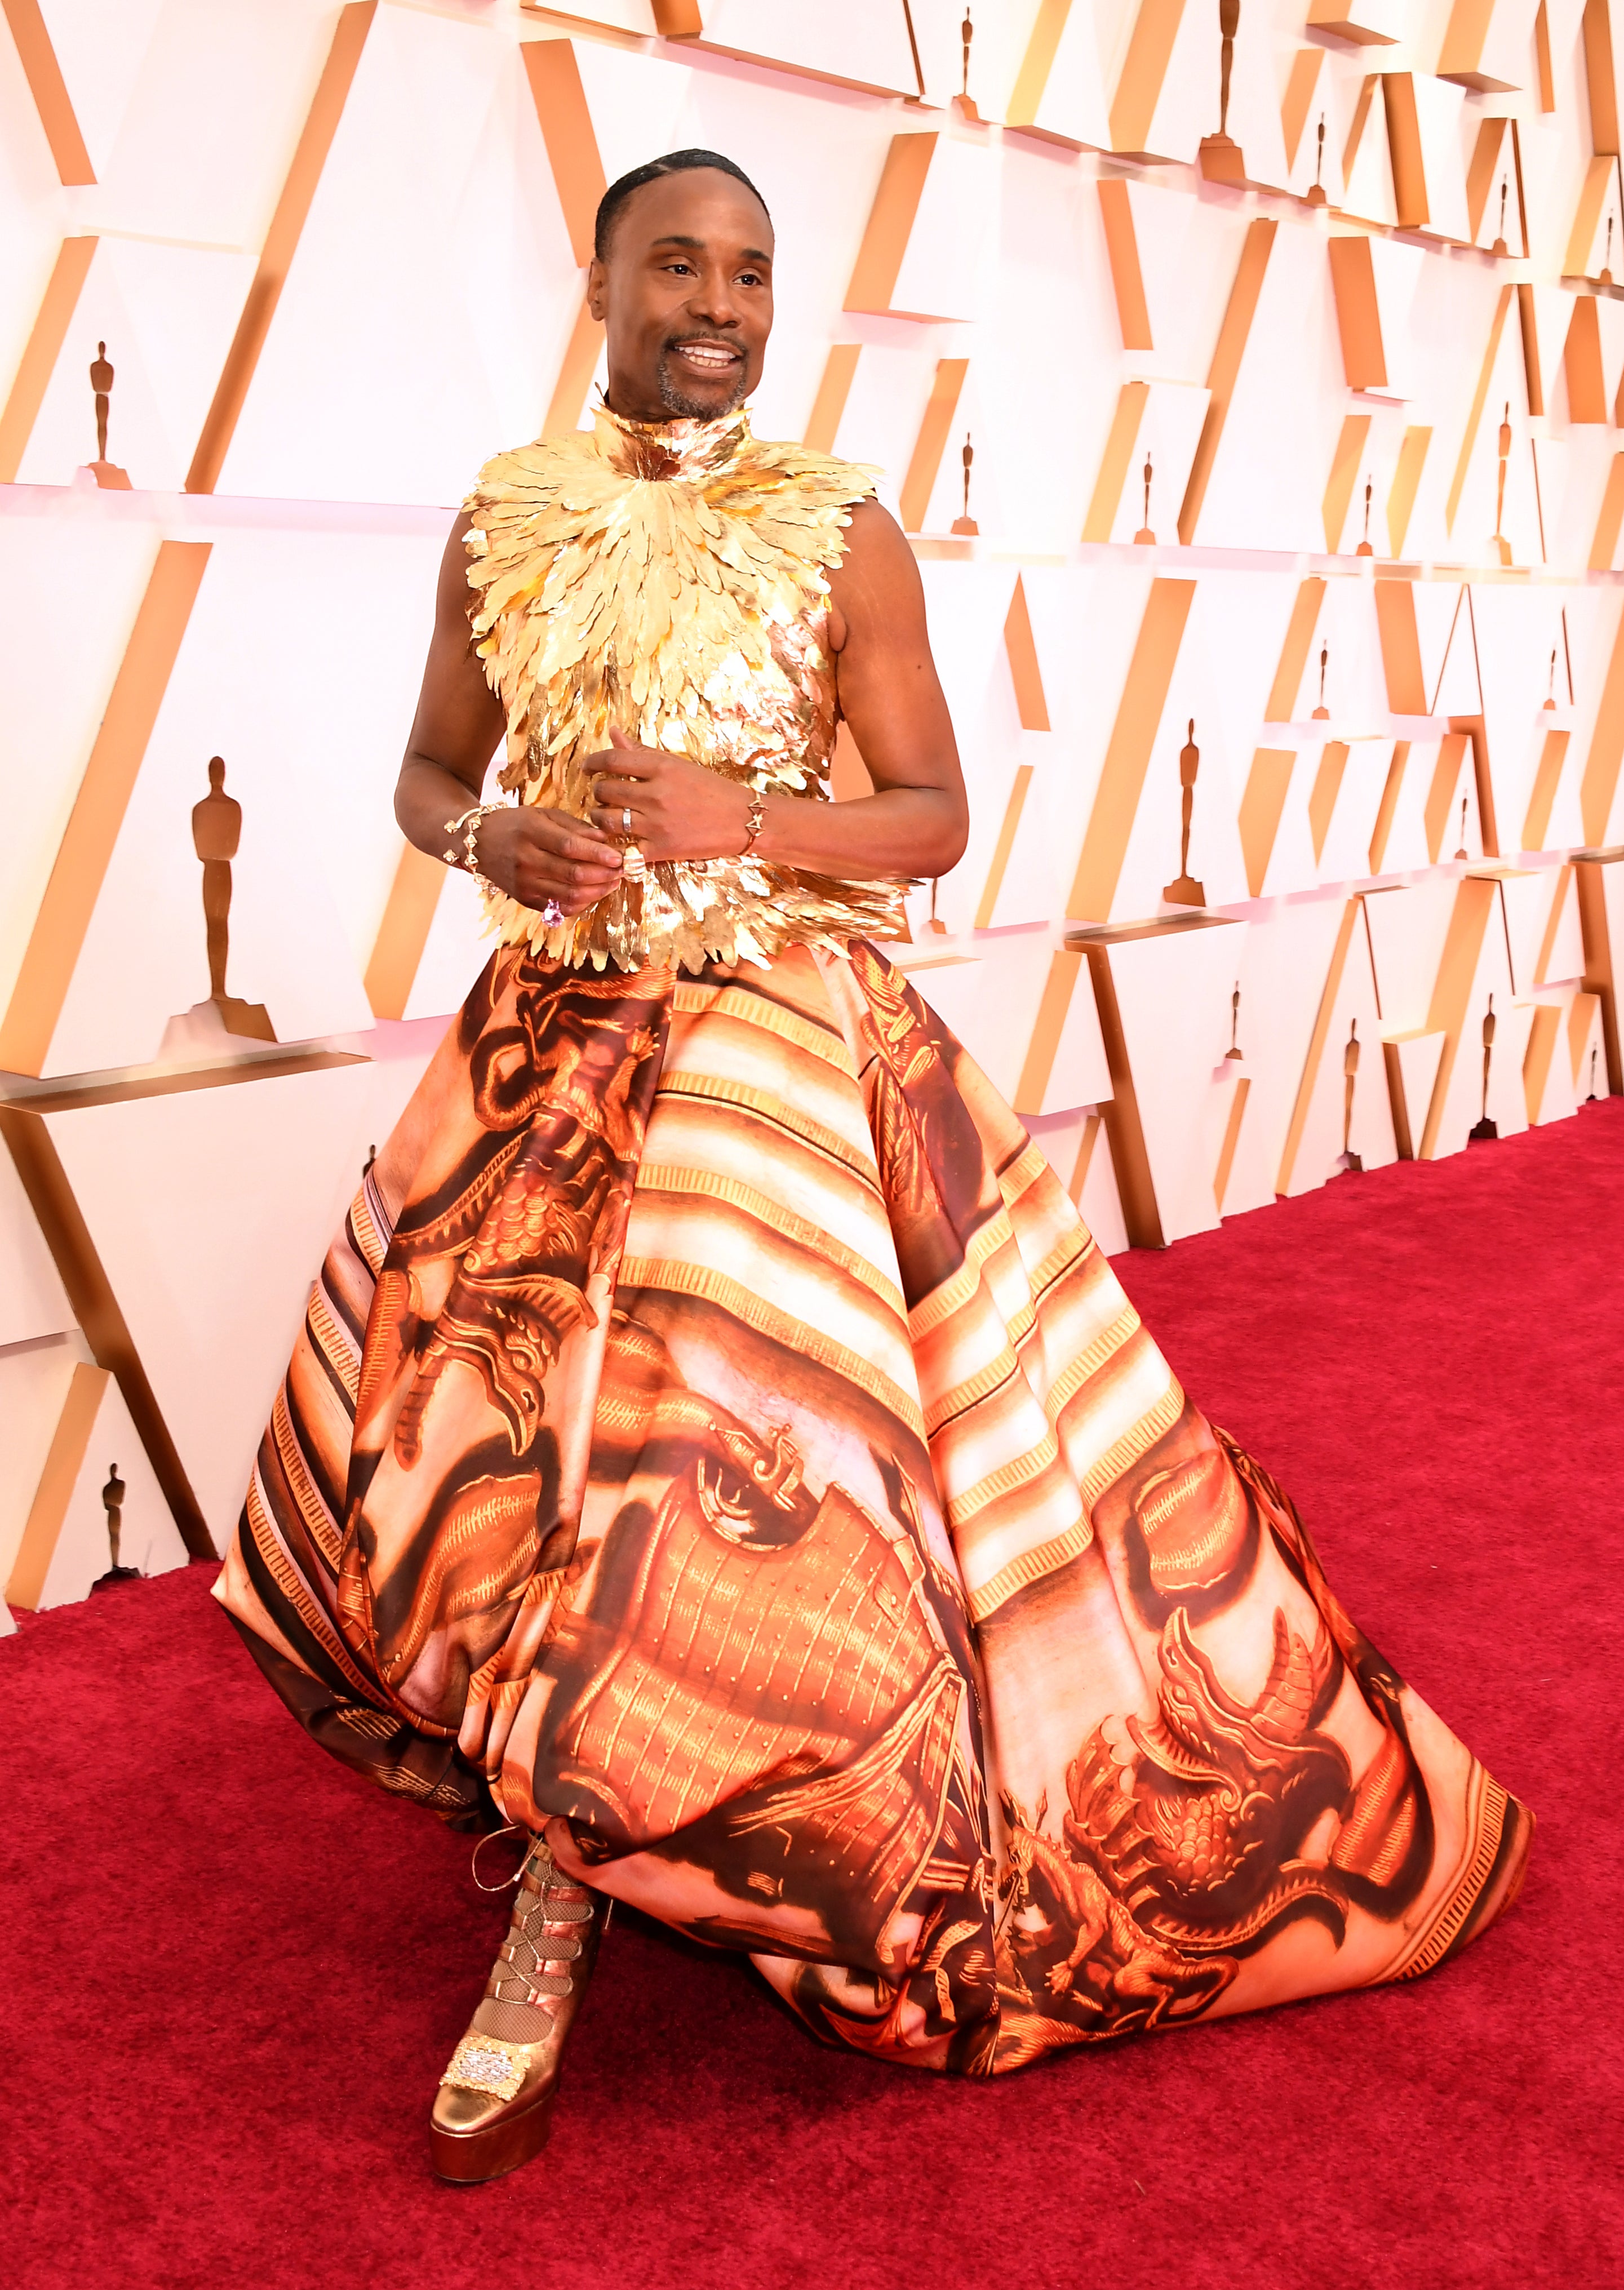 Billy Porter wearing a creation by Giles Deacon to the 2020 Academy Awards